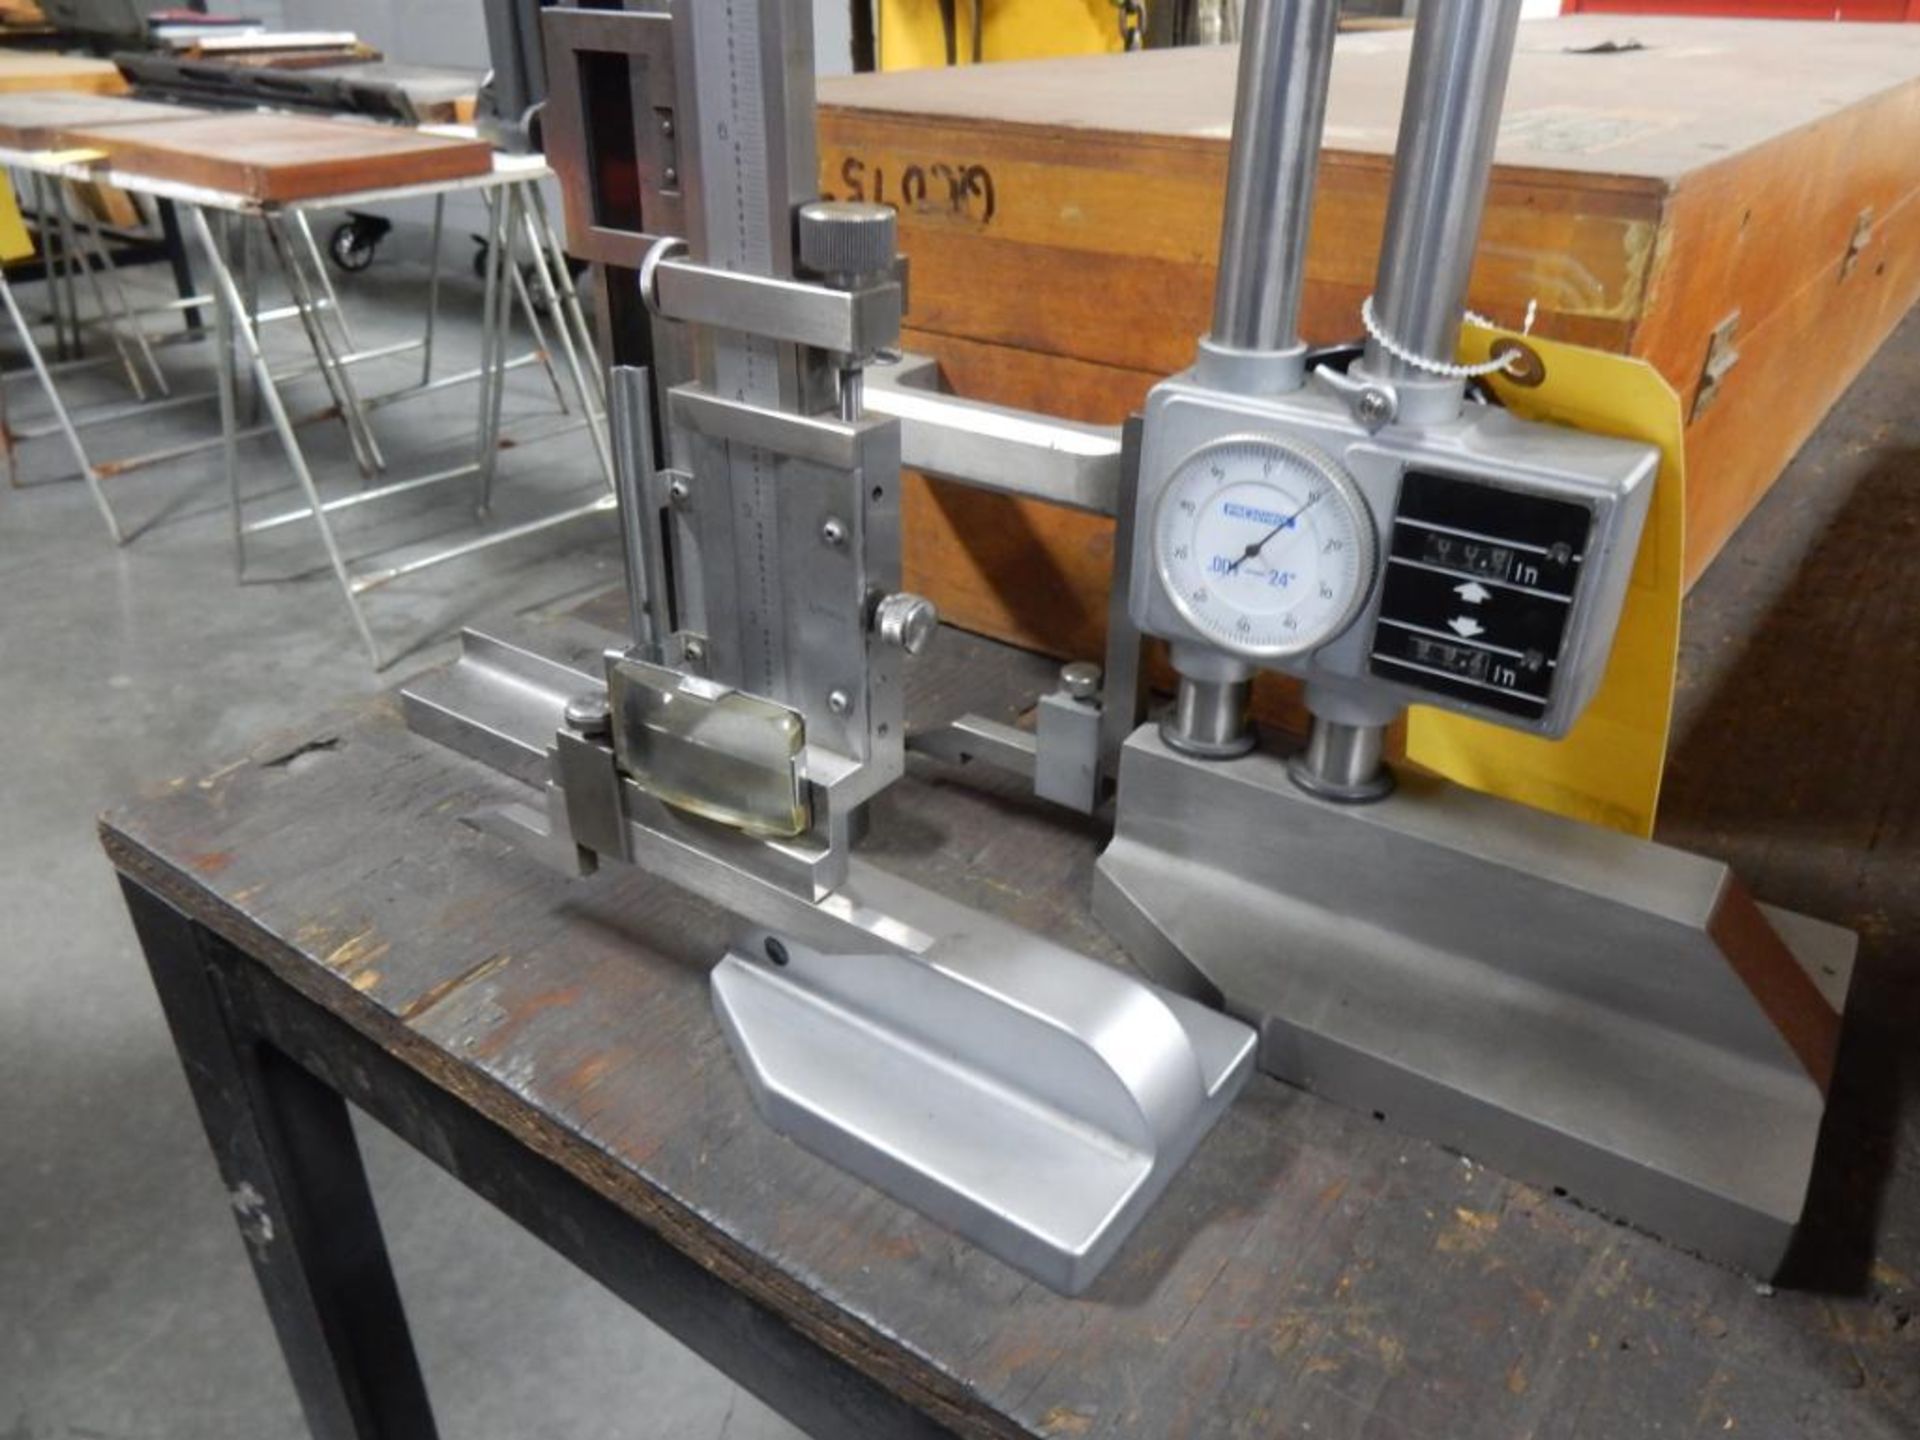 LOT PRO CHECK 24" DIAL HEIGHT GAUGE W/MITUTOYO 12" VERNIER HEIGHT GAUGE & STARRETT 24" VERNIER HEIGH - Image 2 of 2